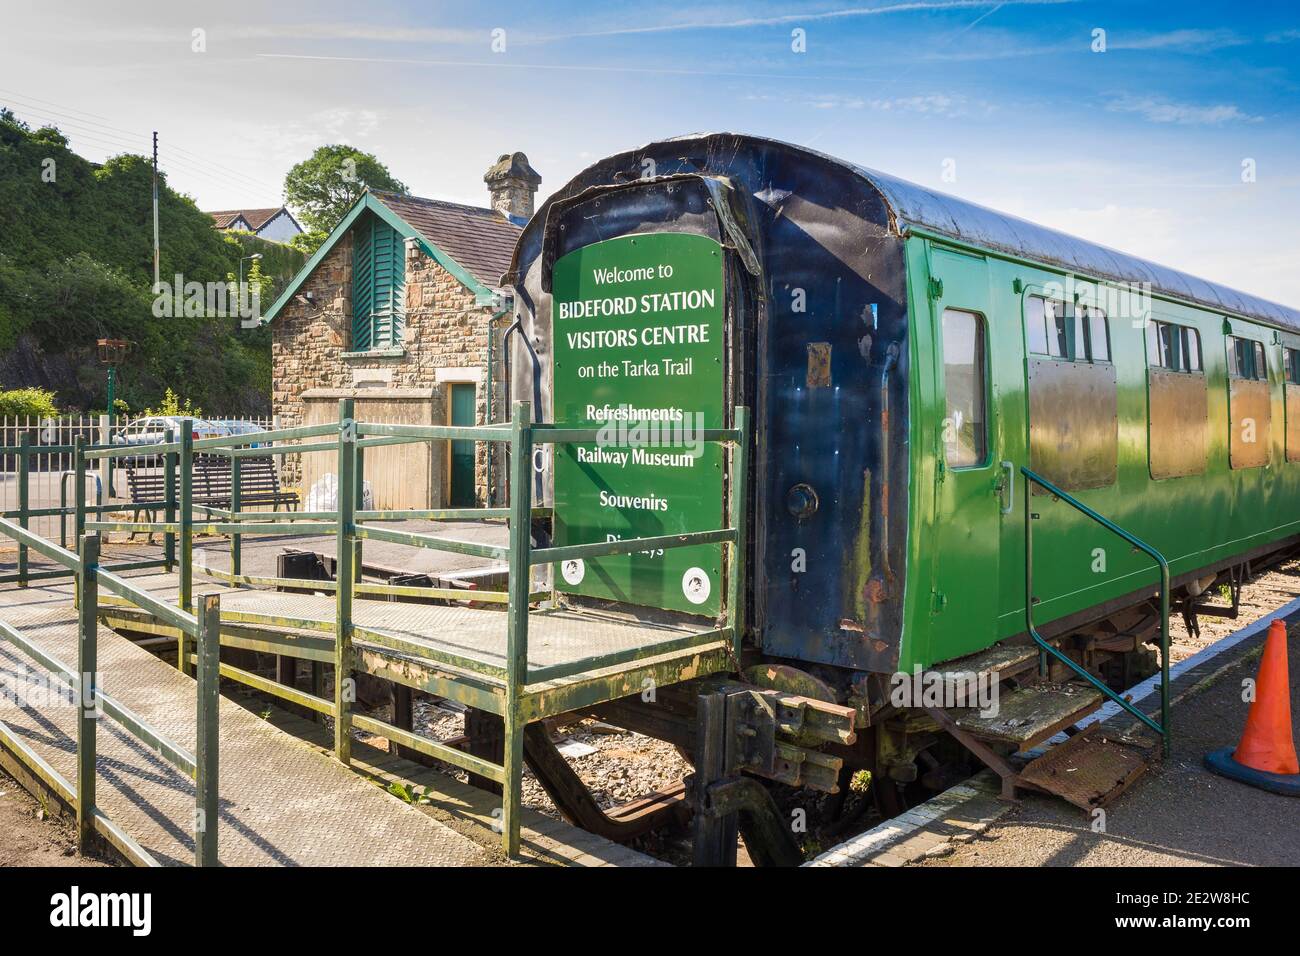 The former railway station in Bideford North Devon England UK The picture shows an old railway carriage used as an information centre and museum. Stock Photo